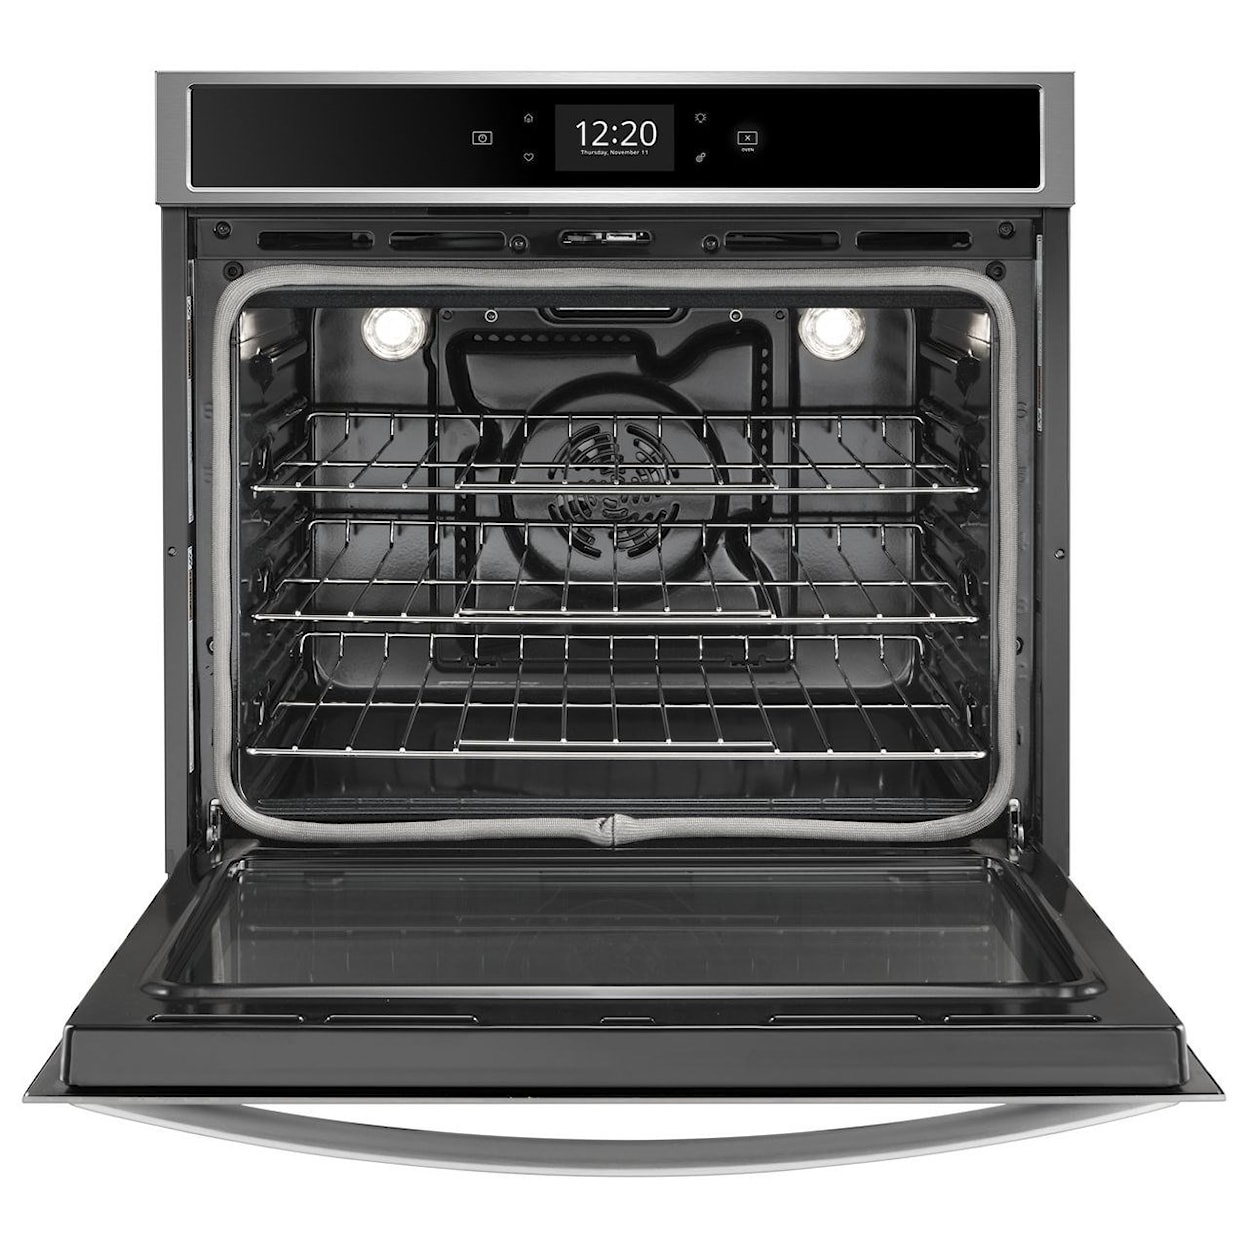 Whirlpool Electric Wall Ovens - Whirlpool 5.0 Cu. Ft. Smart Single Wall Oven